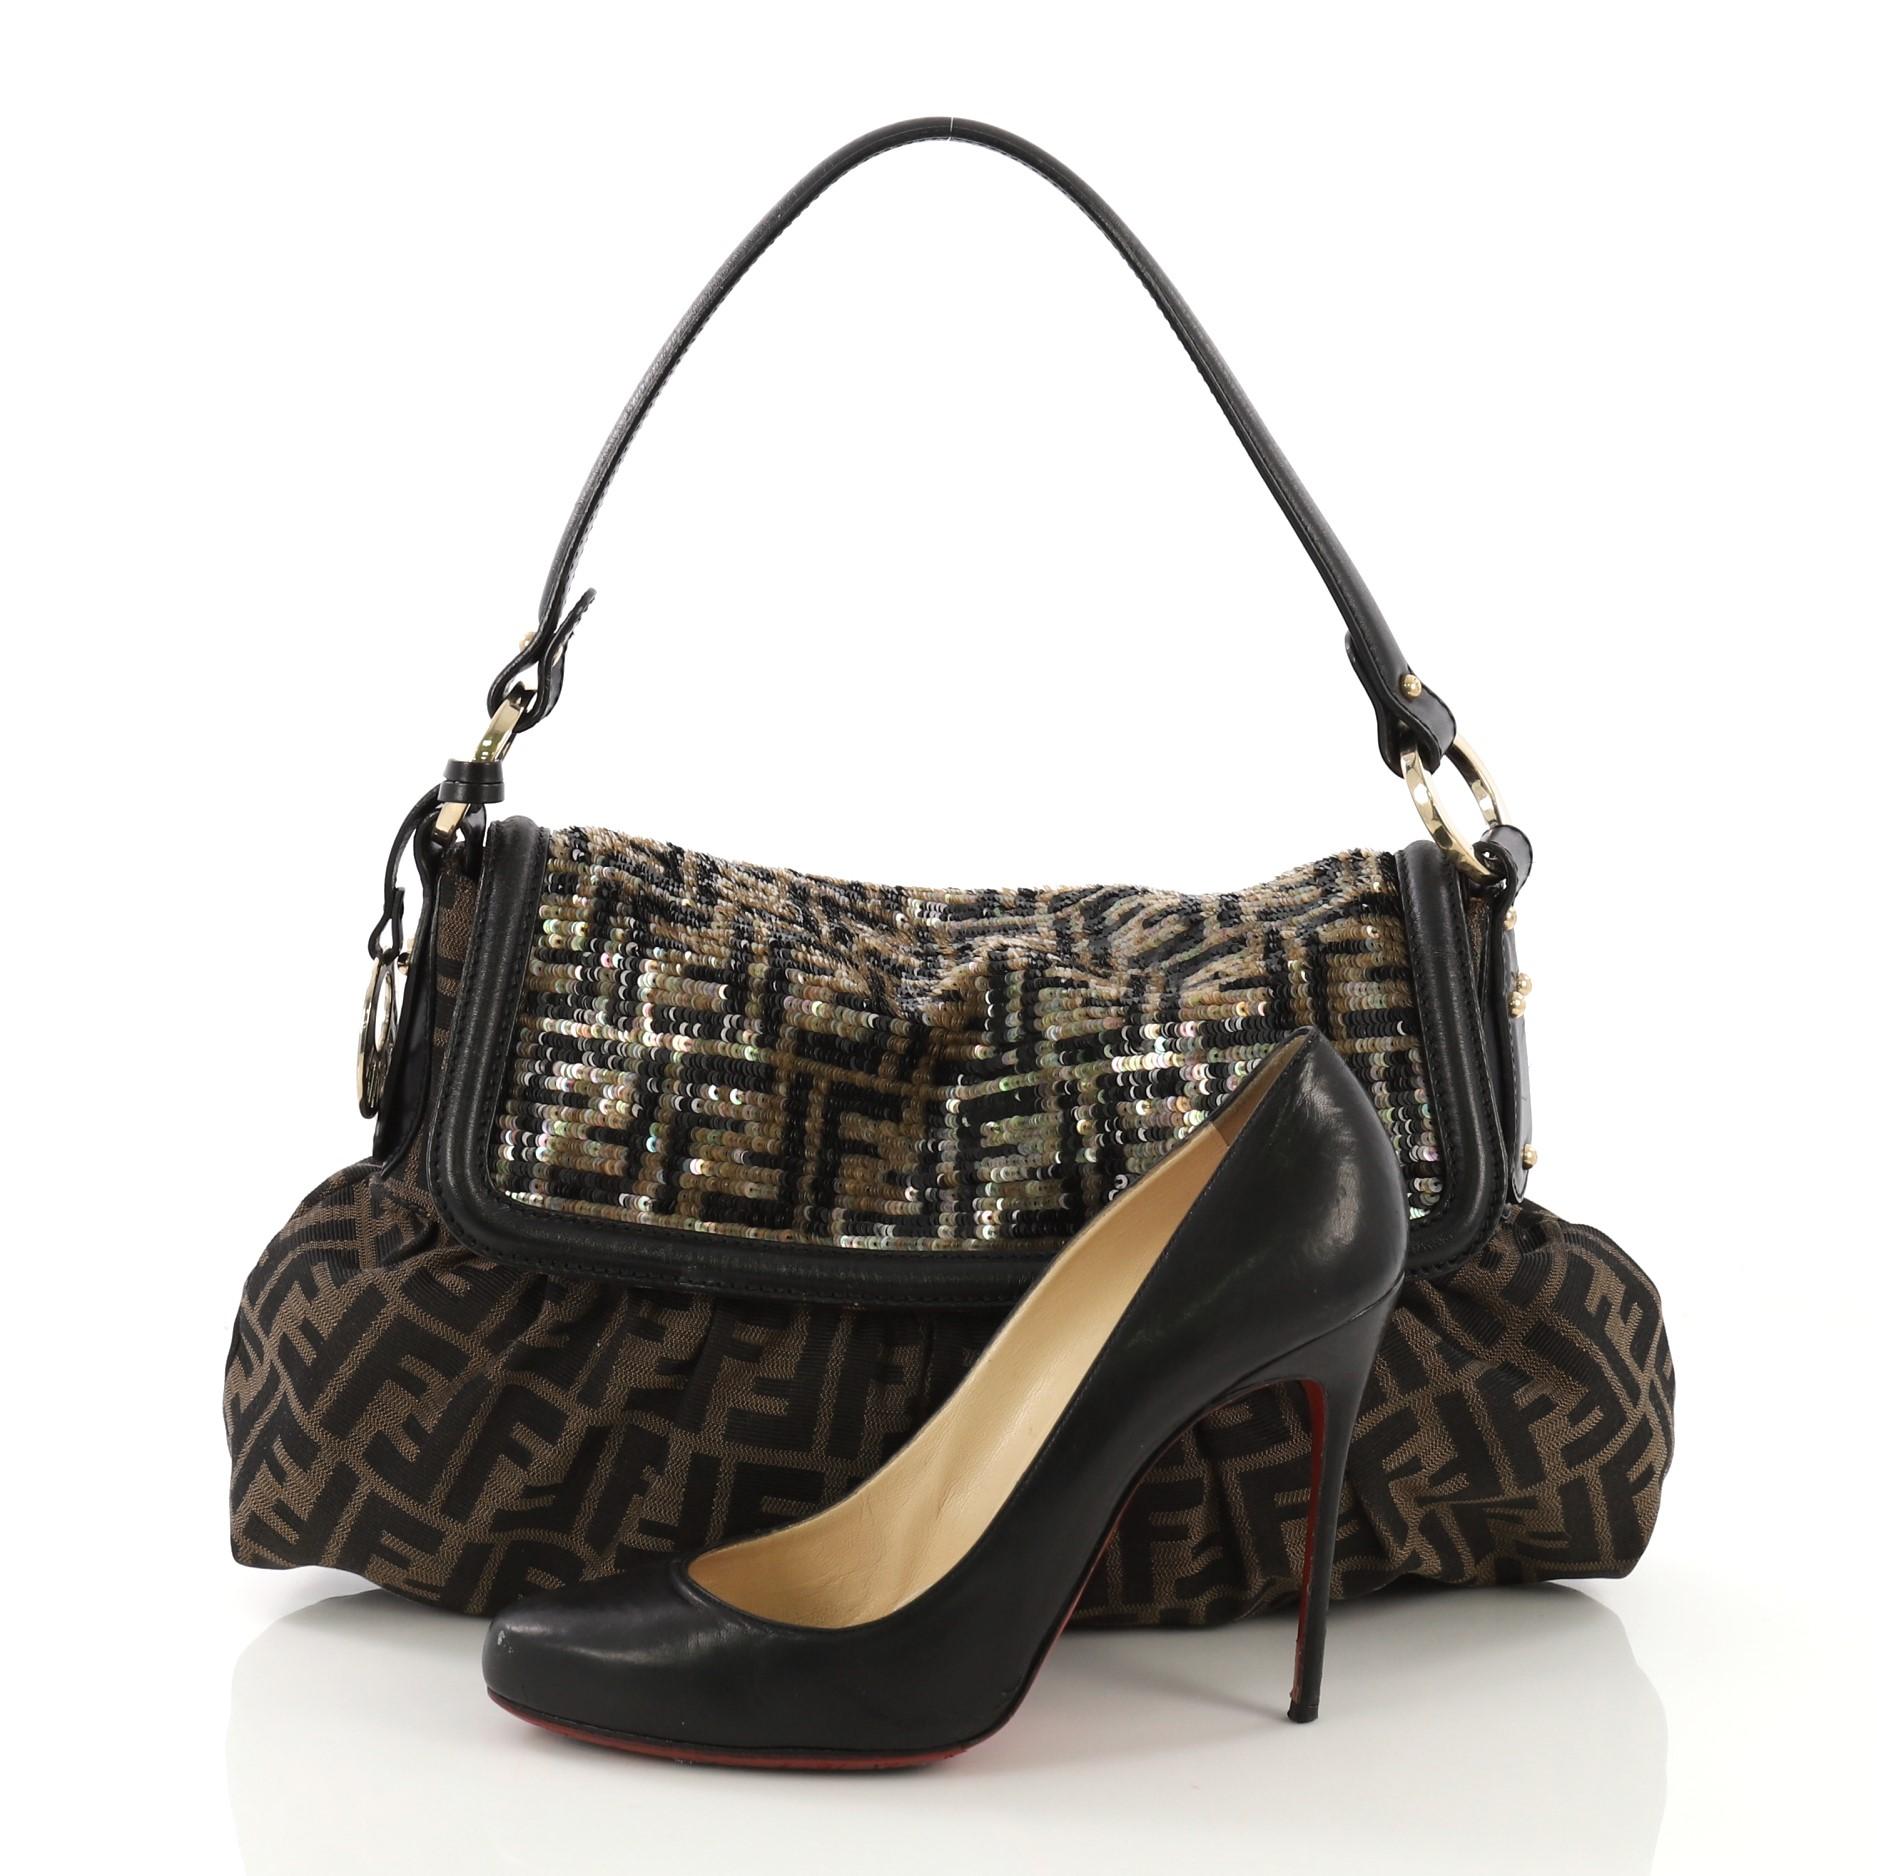 This Fendi Chef Flap Bag Zucca Canvas with Sequins Medium, crafted from brown zucca canvas with sequins, features a leather shoulder strap, leather trim, and gold-tone hardware. Its flap opens to a black fabric interior with zip pocket. **Note: Shoe